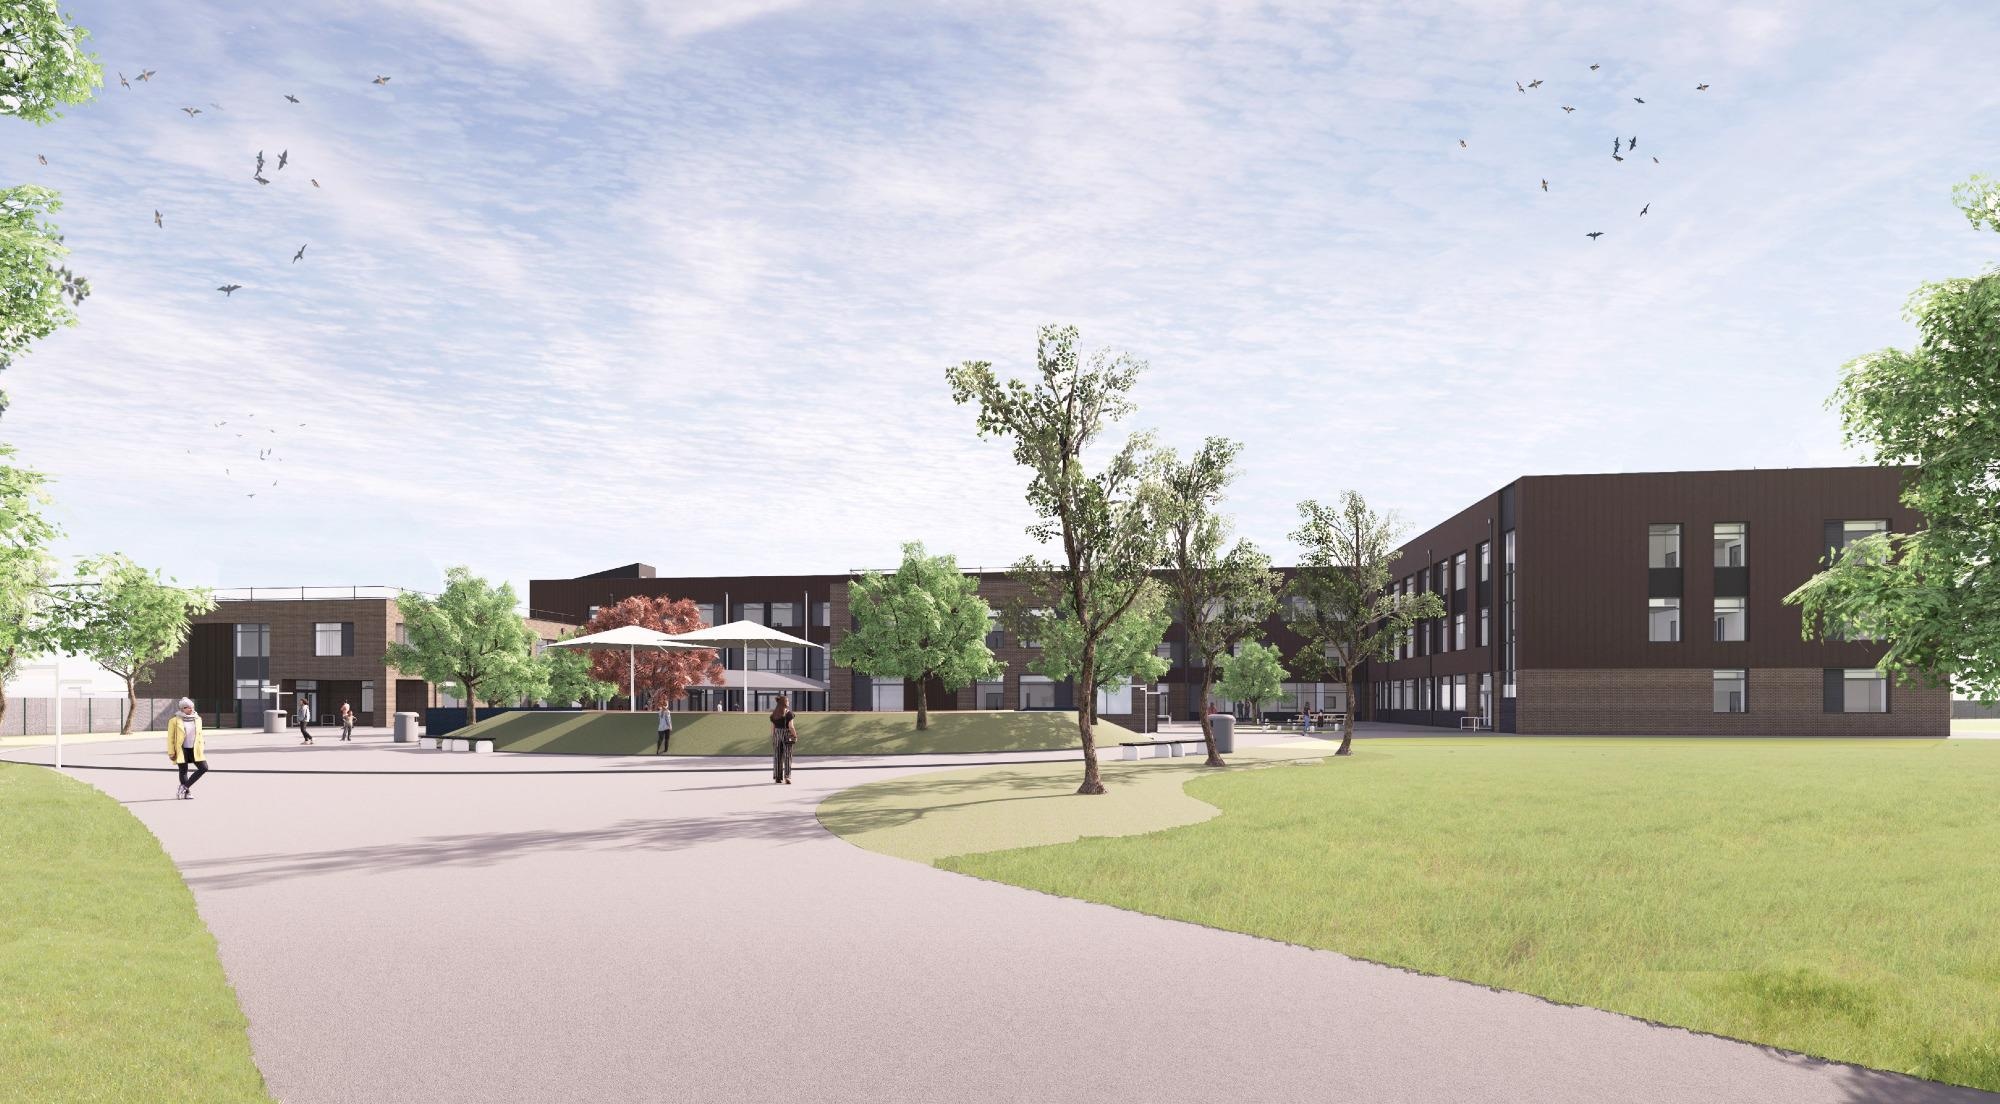 Morgan Sindall Construction Selected as Preferred Bidder for £36 Million Low Carbon Buckinghamshire Secondary School